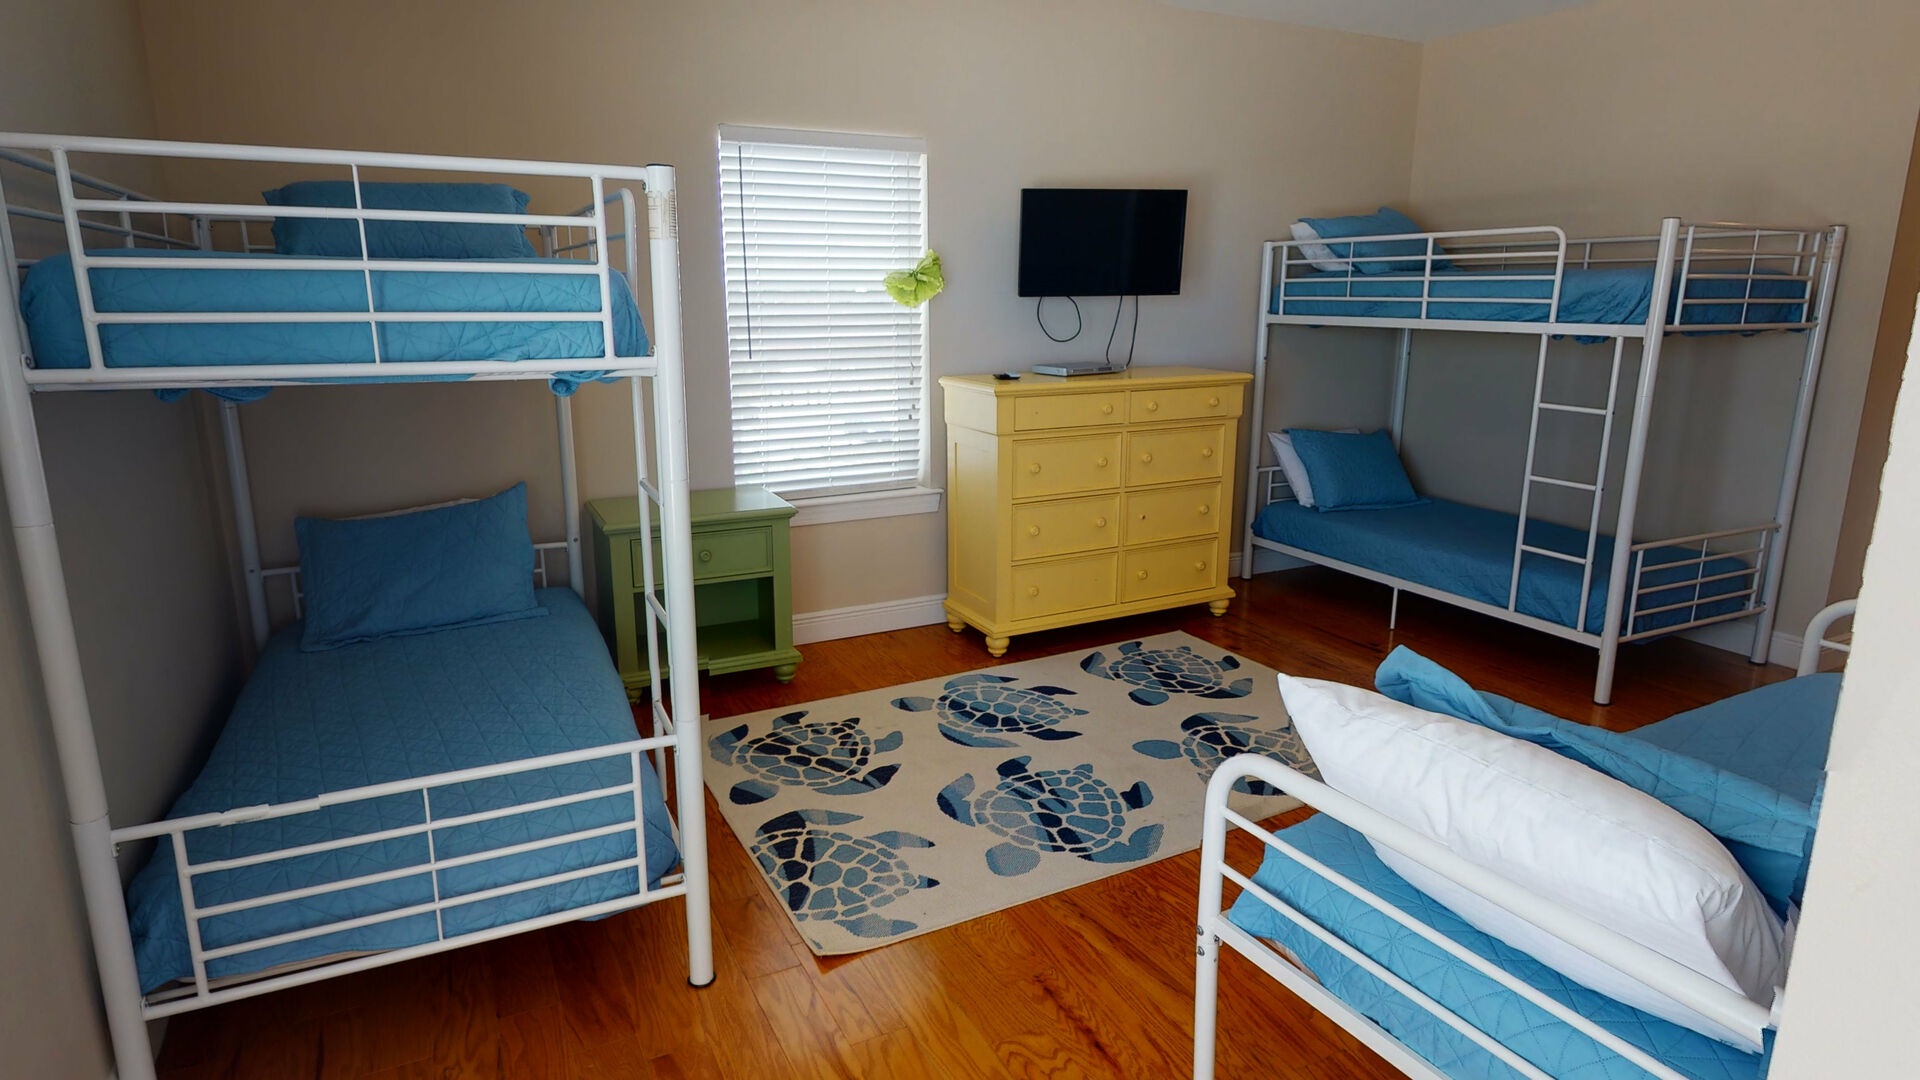 Bedroom 4 is on the 2nd floor and sleeps 5 in 2 Twin bunks+1 Twin bed and has a TV, balcony access and a private bath